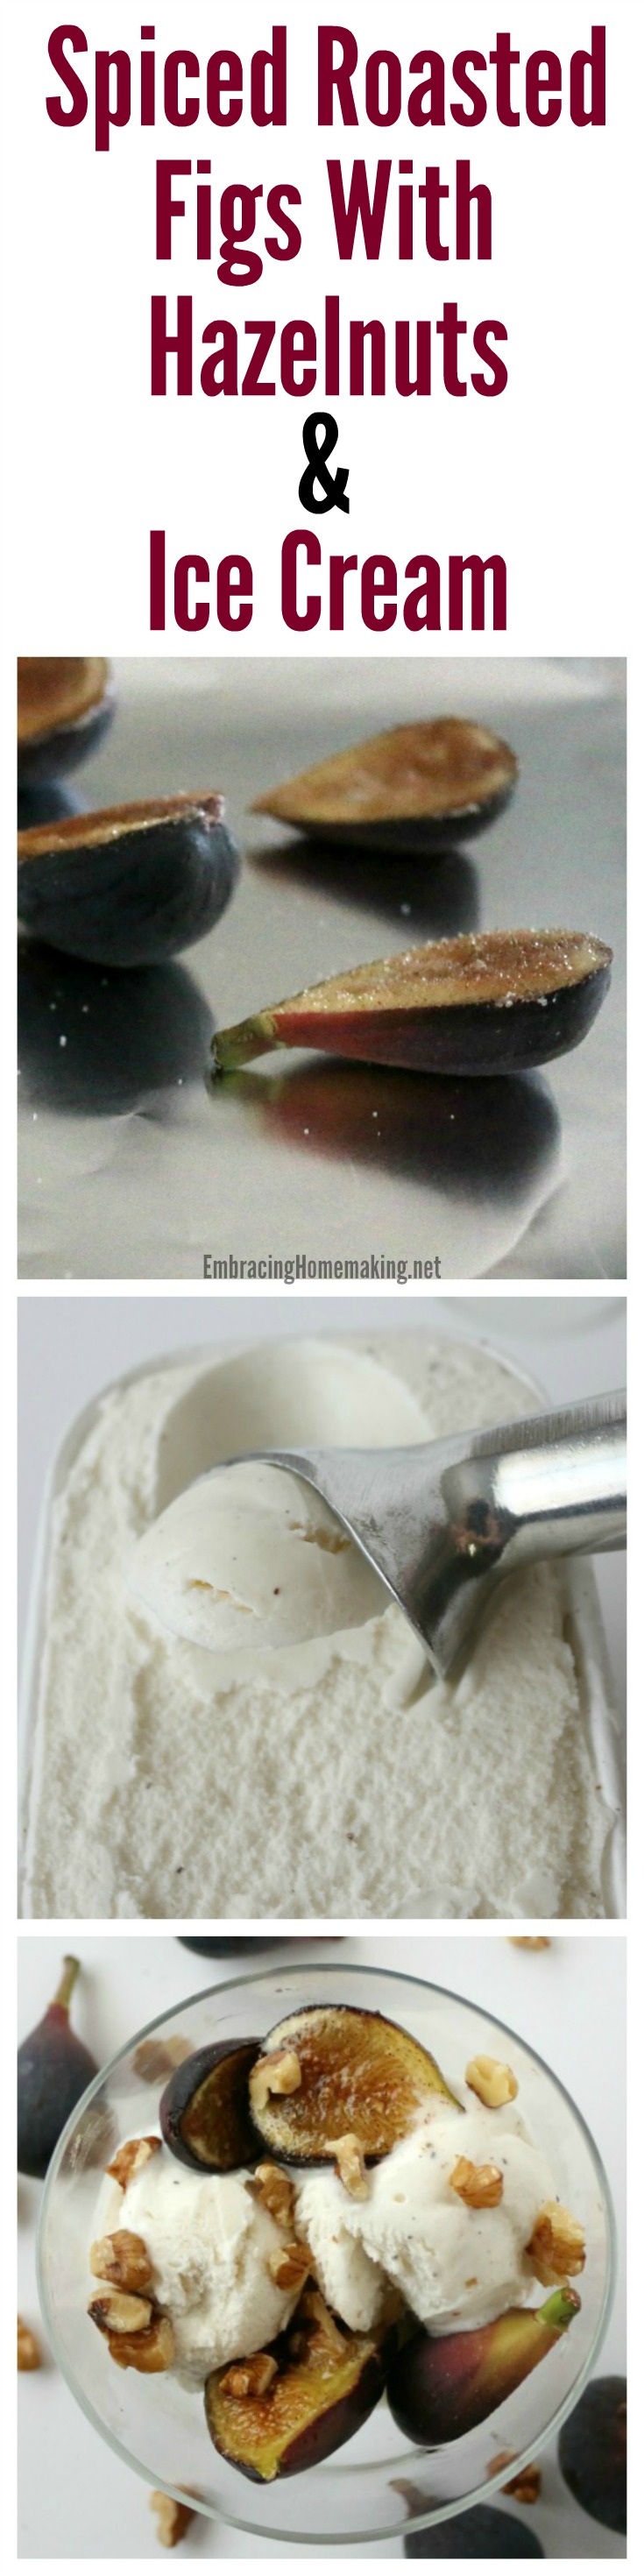 Spiced Roasted Figs with Ice Cream